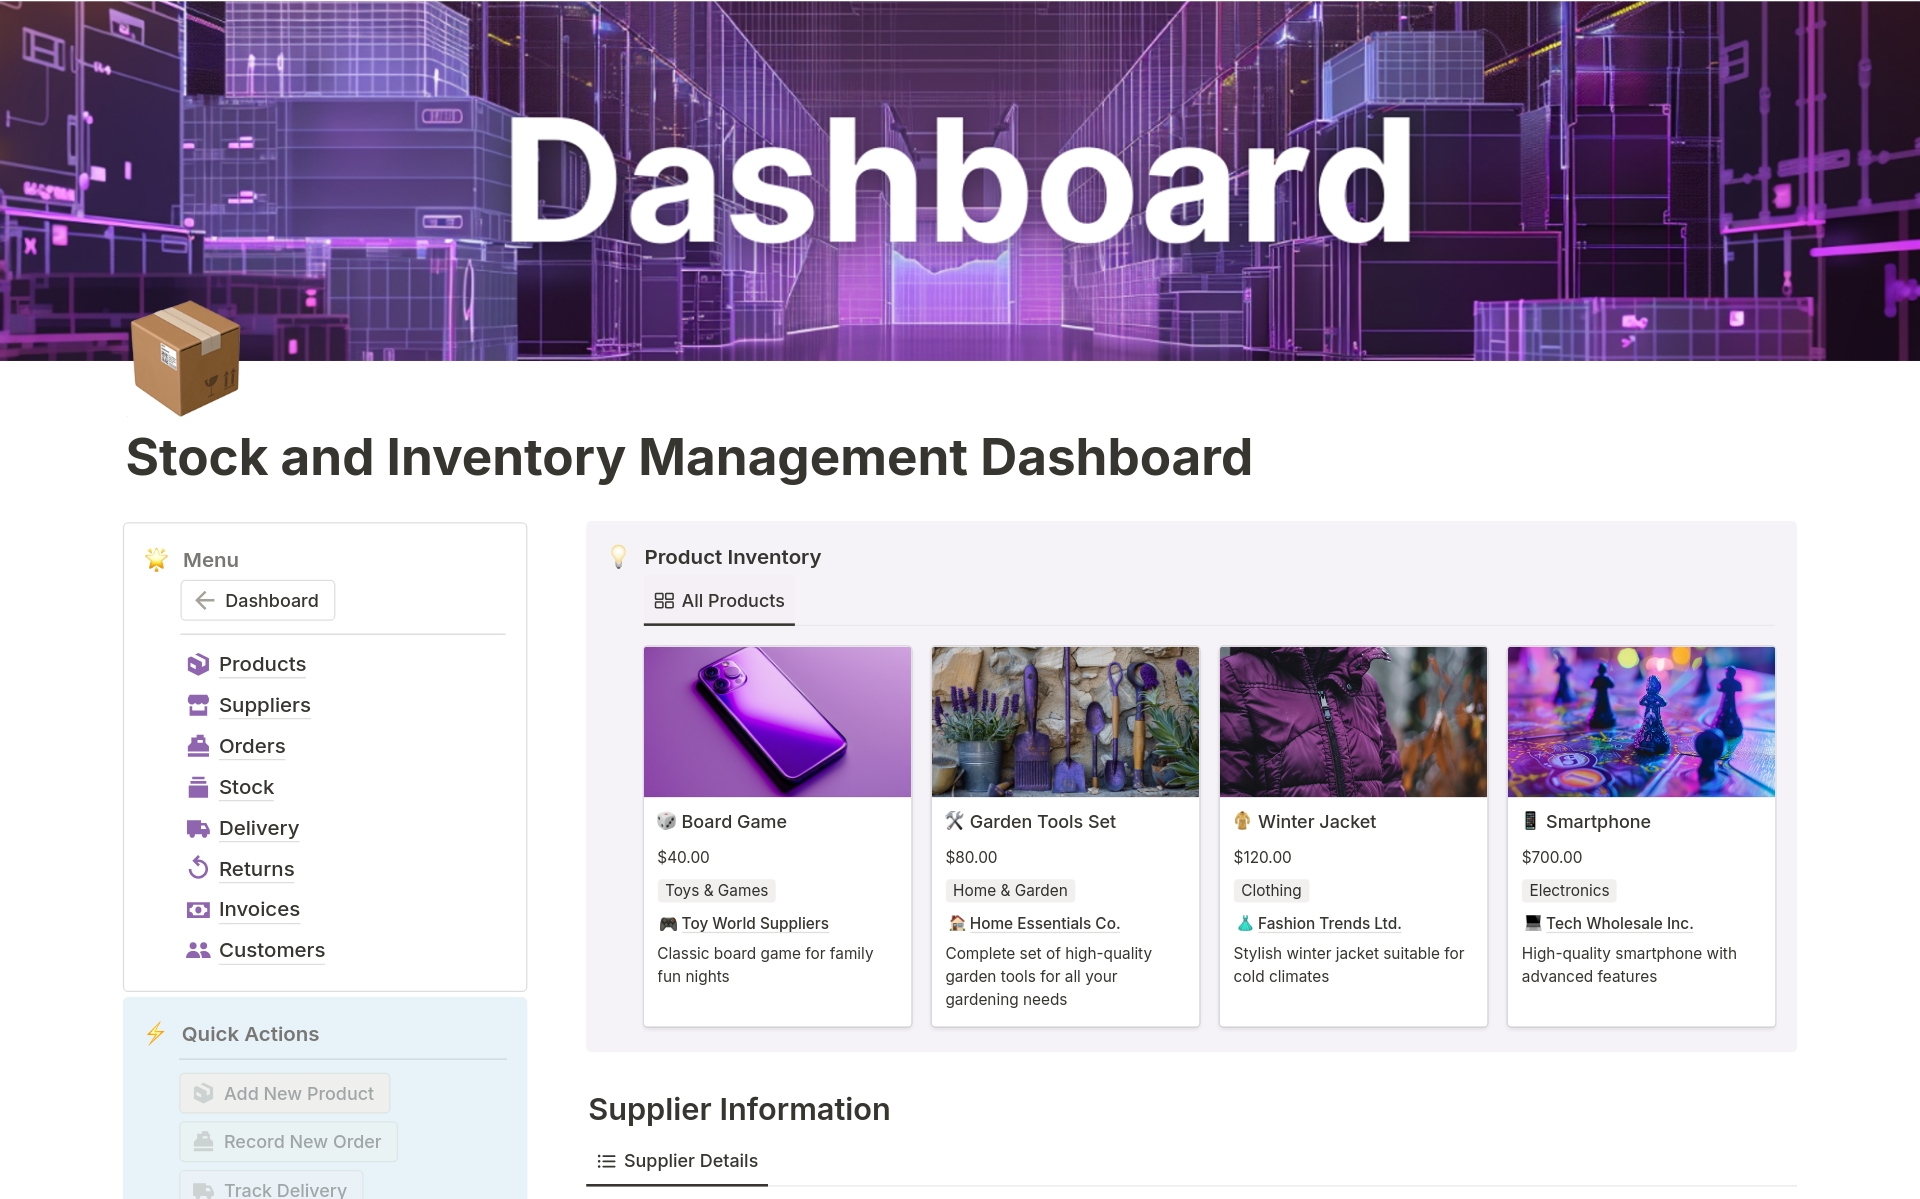 Take charge of your inventory management with our Comprehensive Inventory Management Template, designed to streamline tracking, orders, deliveries, and more for business owners.